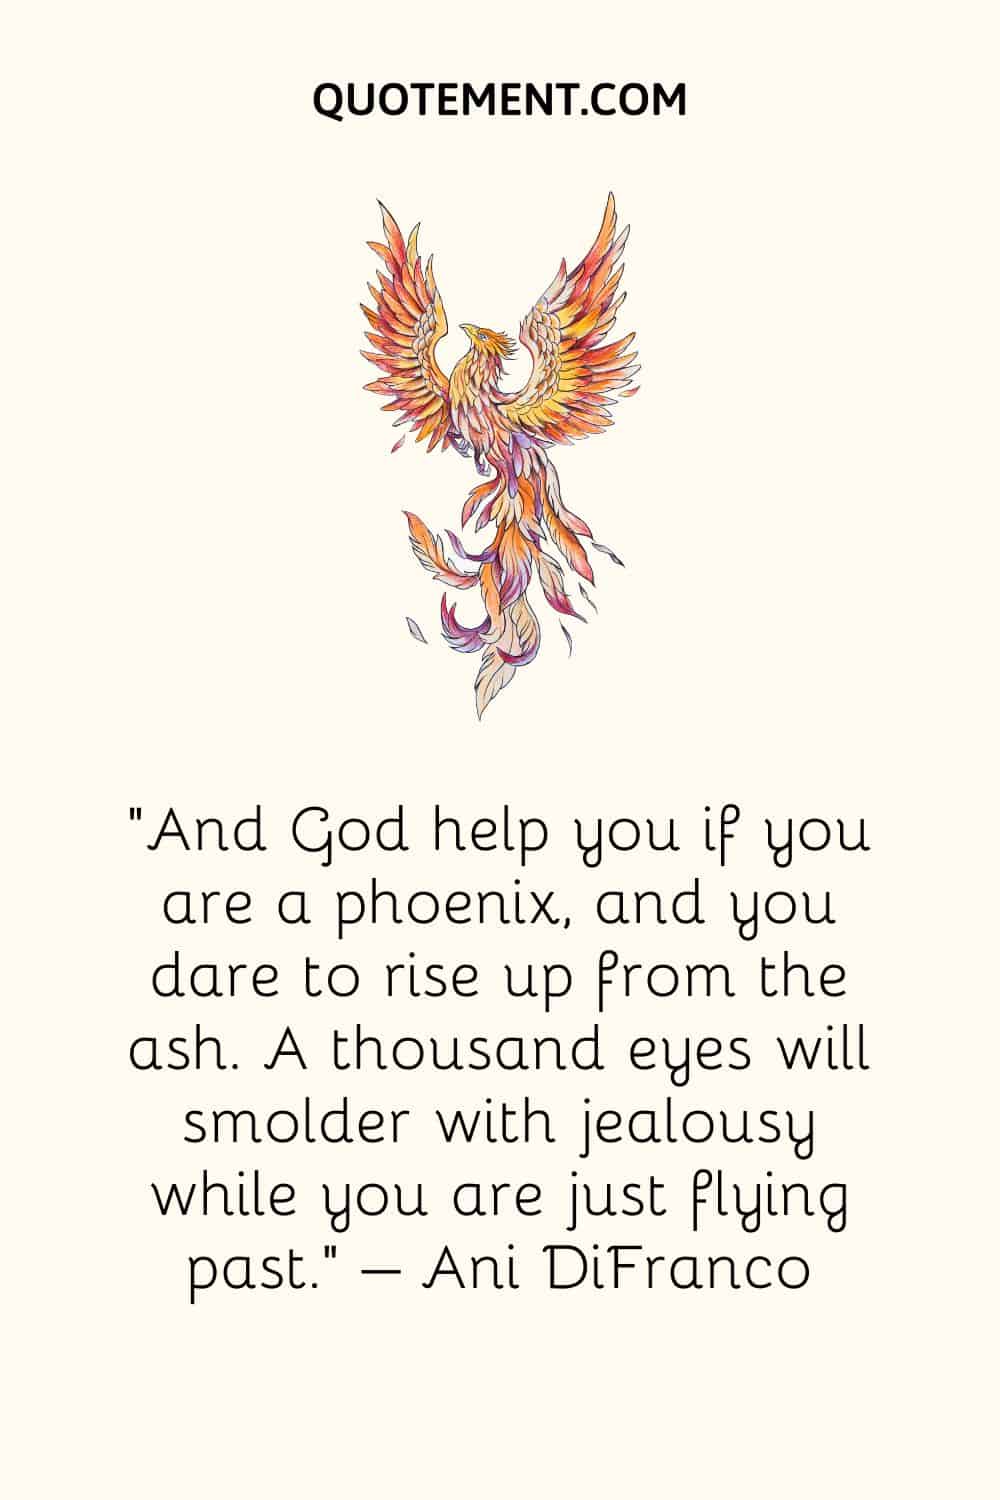 And God help you if you are a phoenix, and you dare to rise up from the ash